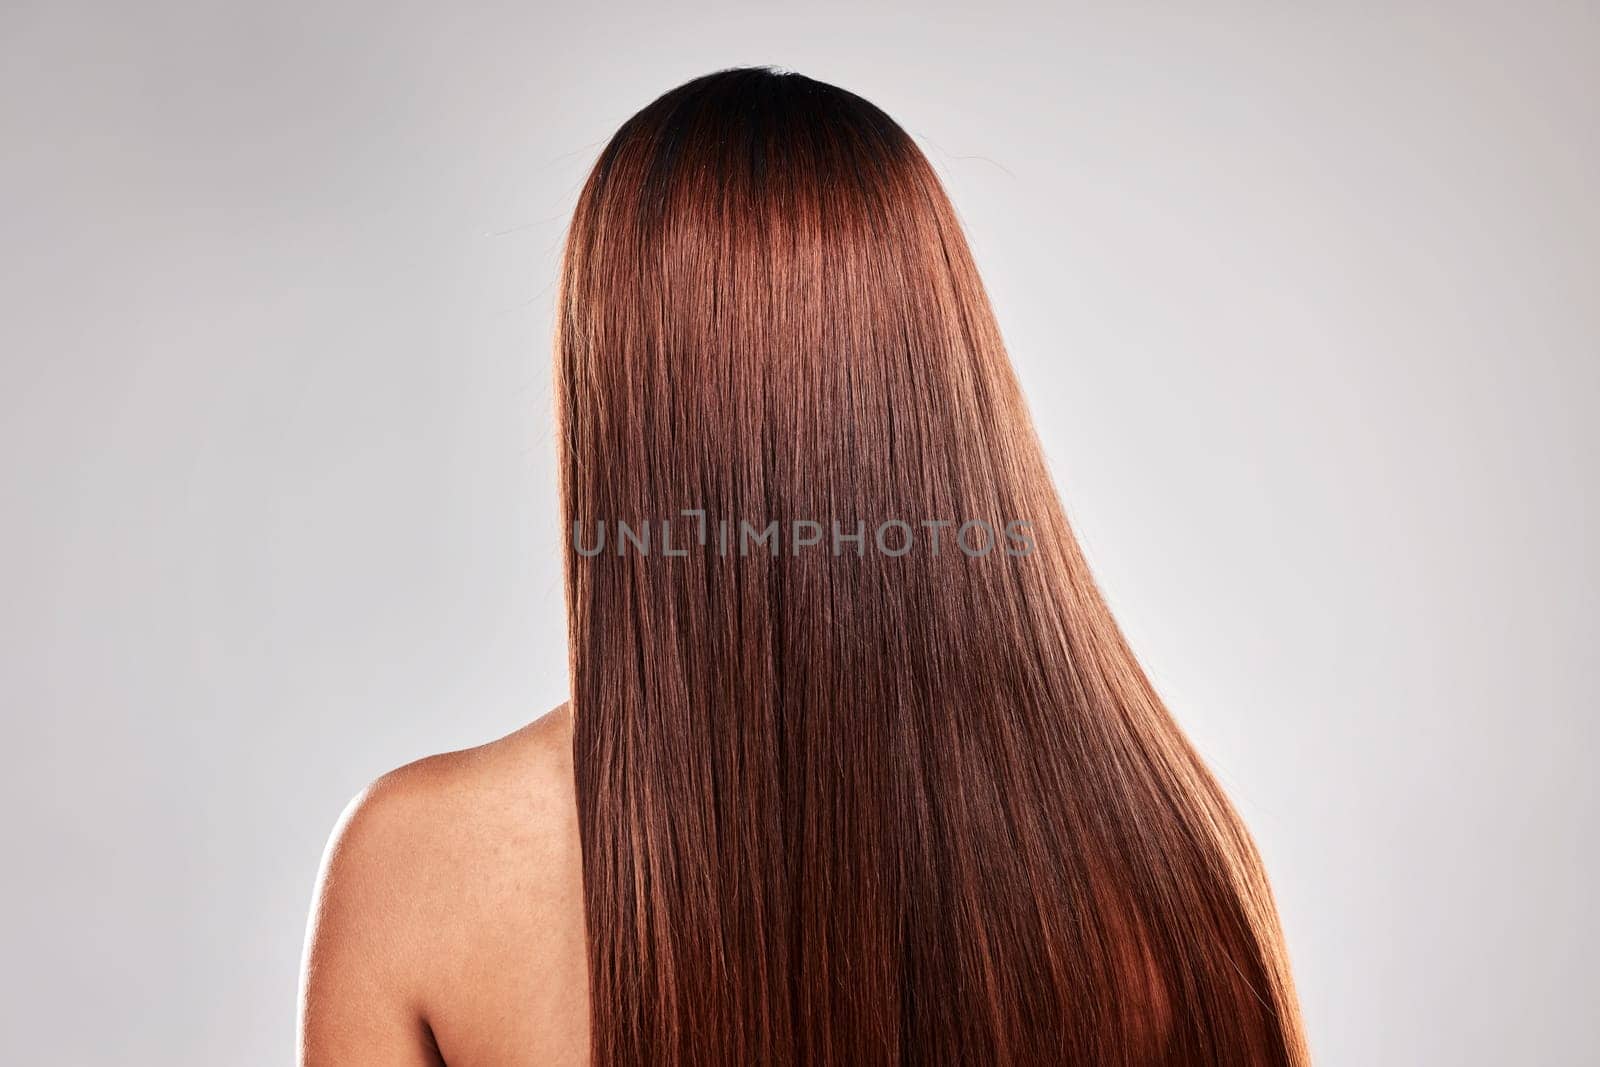 Hair care, health and beauty of girl with texture shine and smooth keratin style of people. Glossy aesthetic and glow treatment of person back view at isolated studio gray background